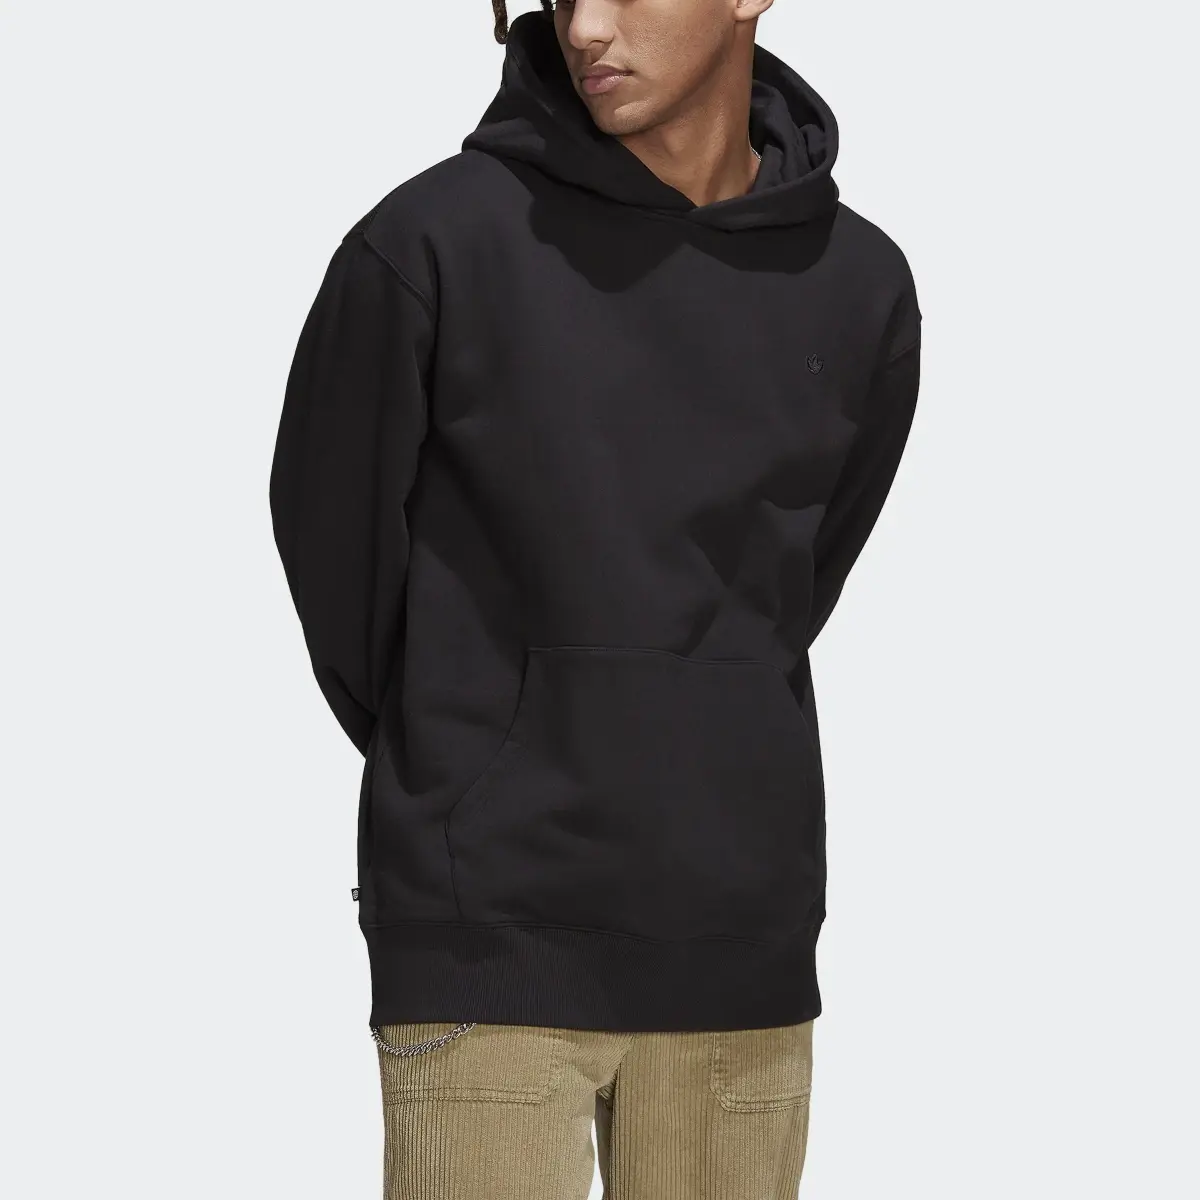 Adidas Adicolor Contempo French Terry Hoodie. 1